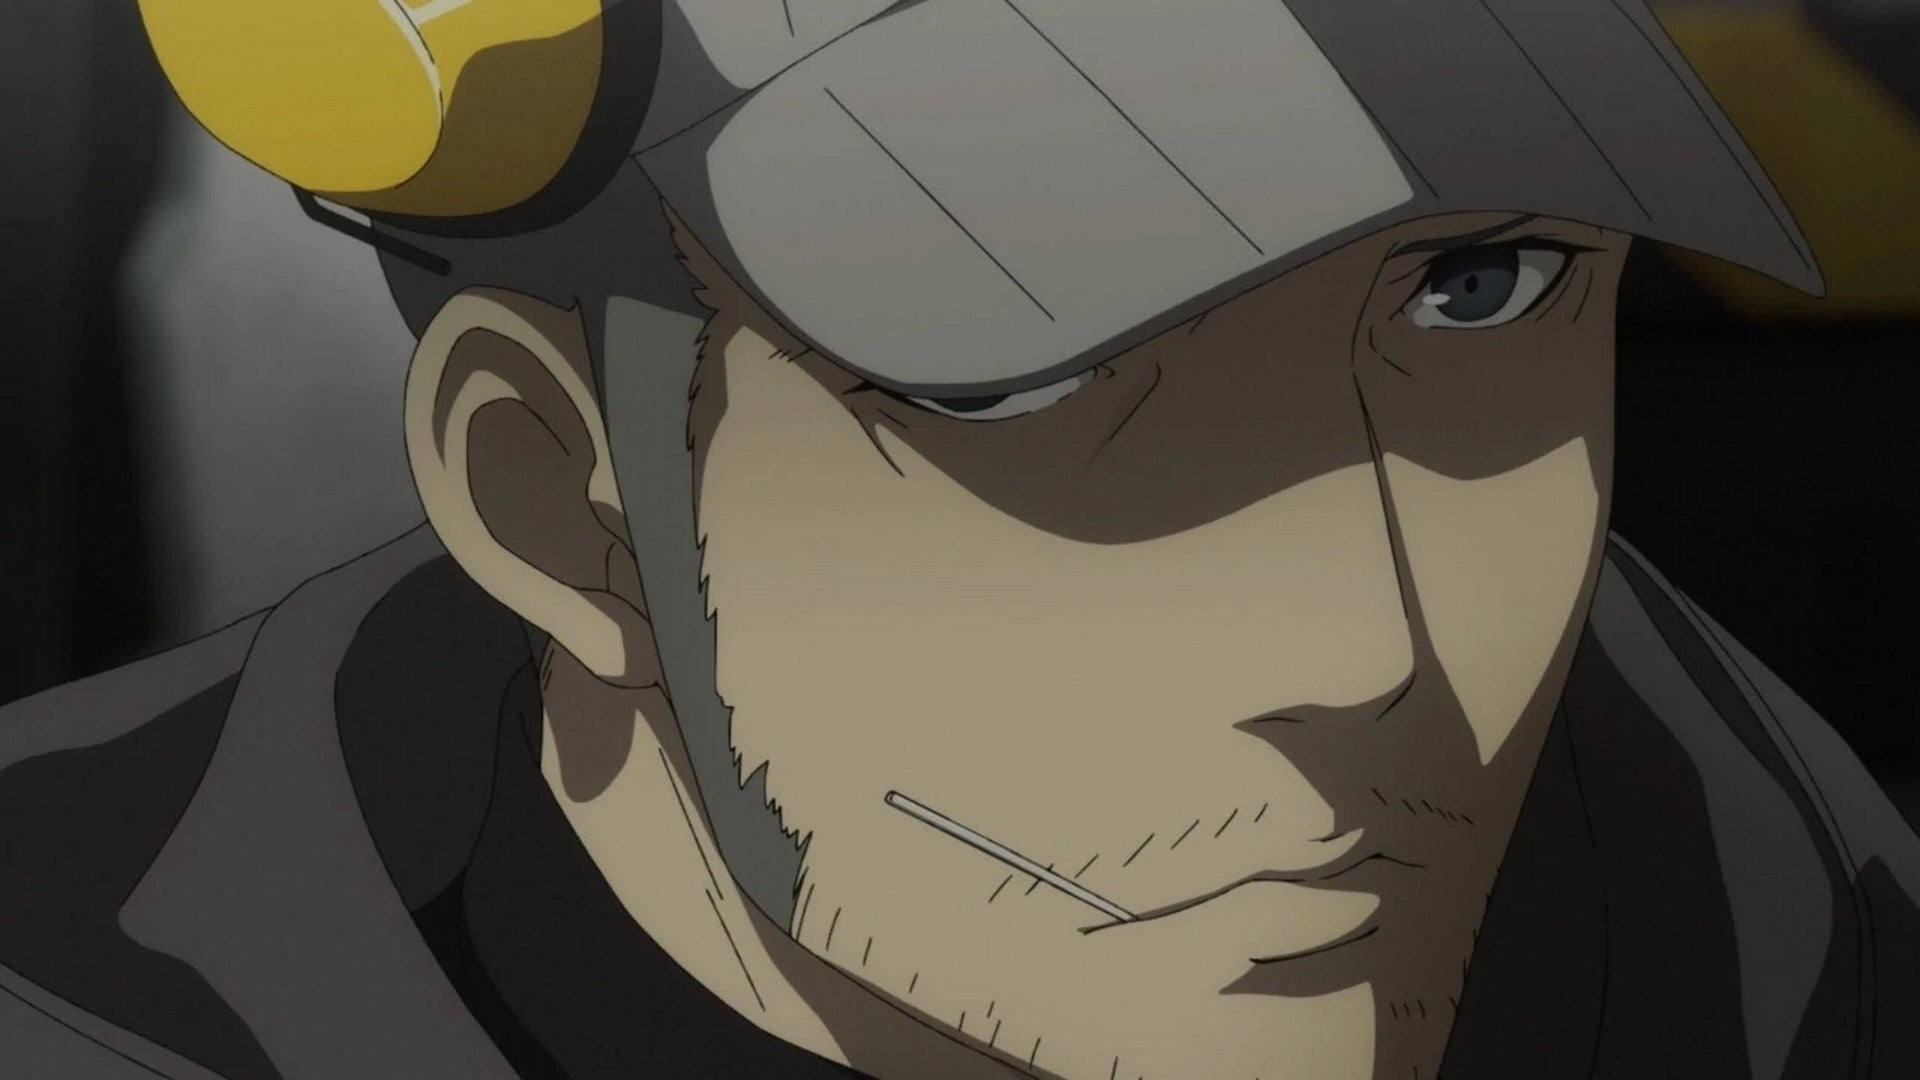 Persona 5 Royal Iwai Confidant: An anime man in a grey hat and trench coat stares offscreen with a serious expression on his face